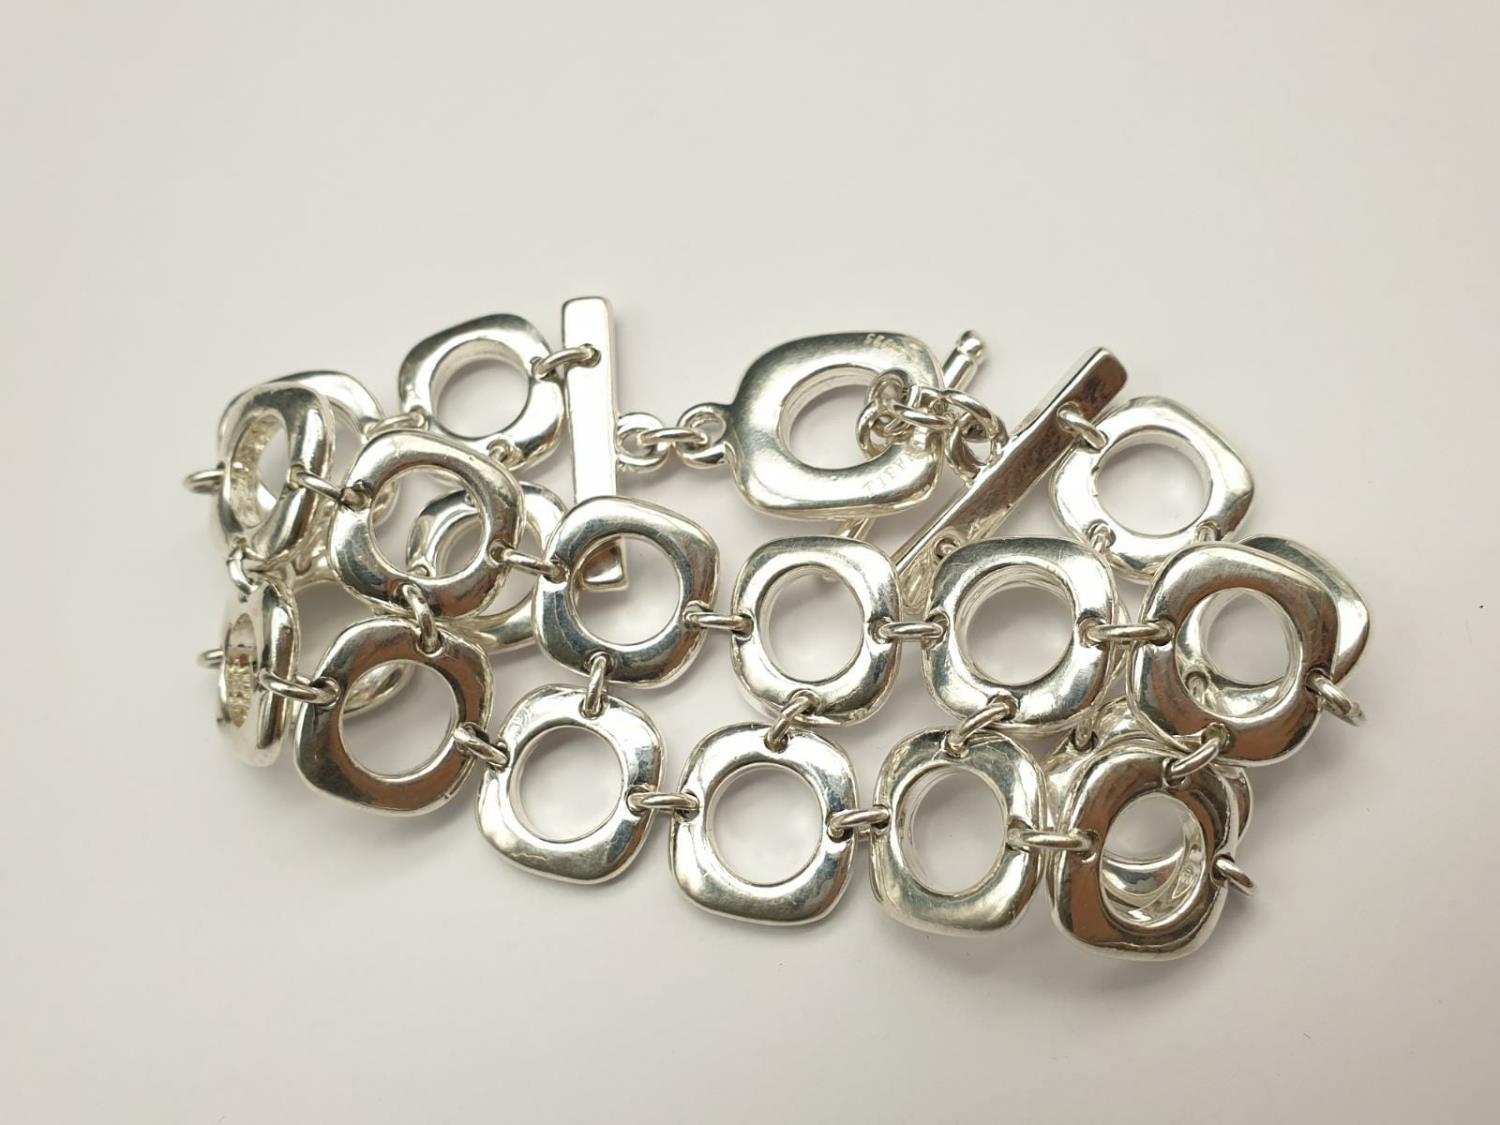 A DOUBLE ROW SILVER BRACELET MARKED AS TIFFANY WITH T-BAR FASTENER. 97.3gms 18cms - Image 5 of 5